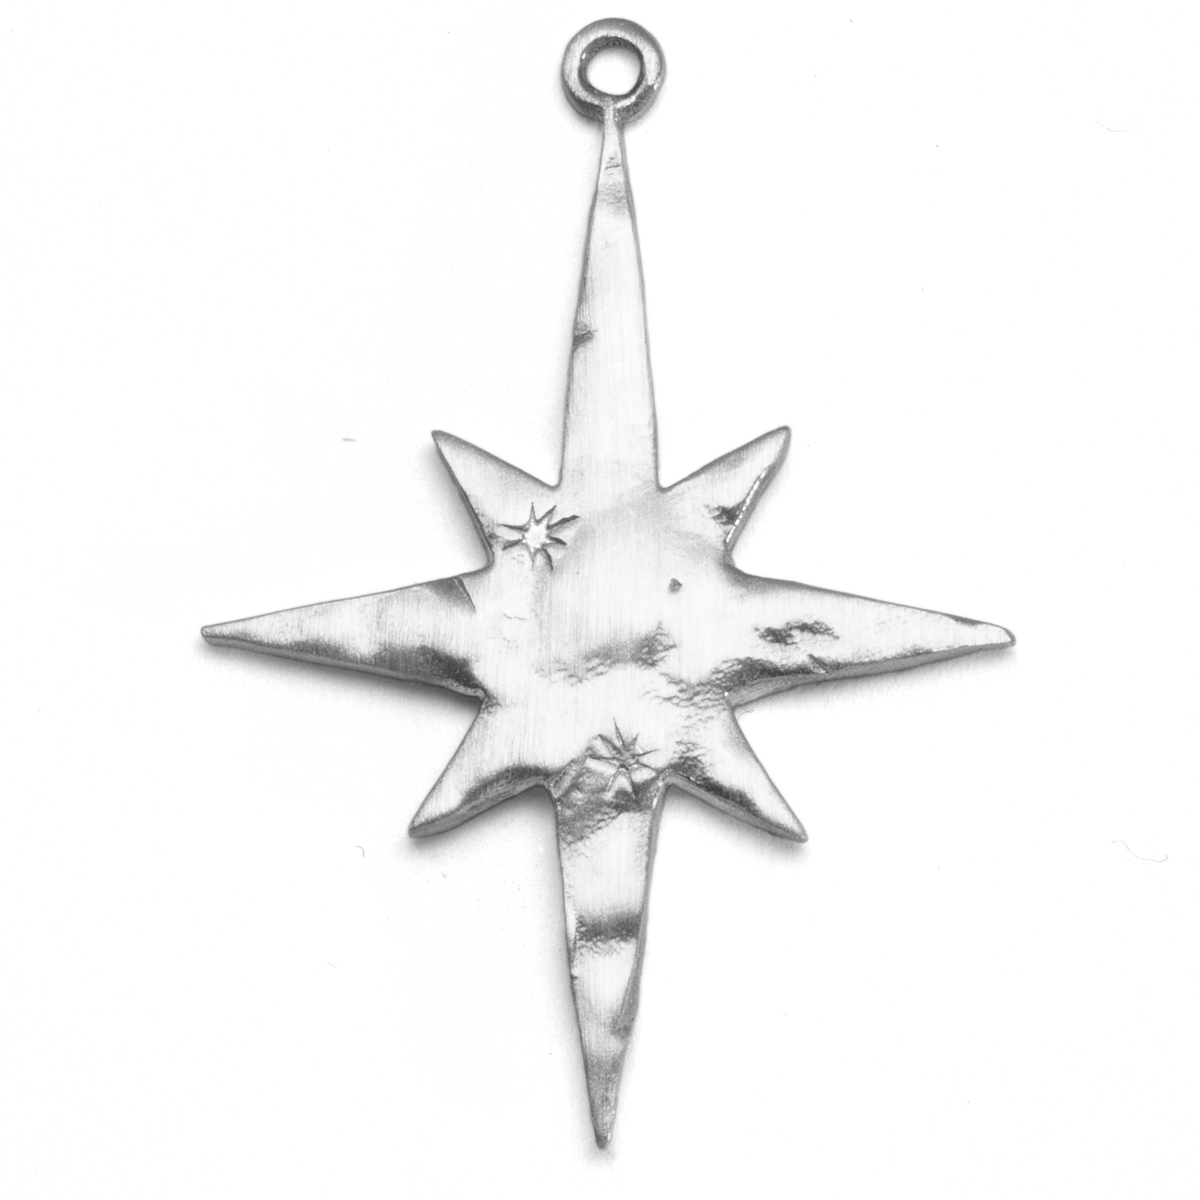 chunky sterling silver star charm